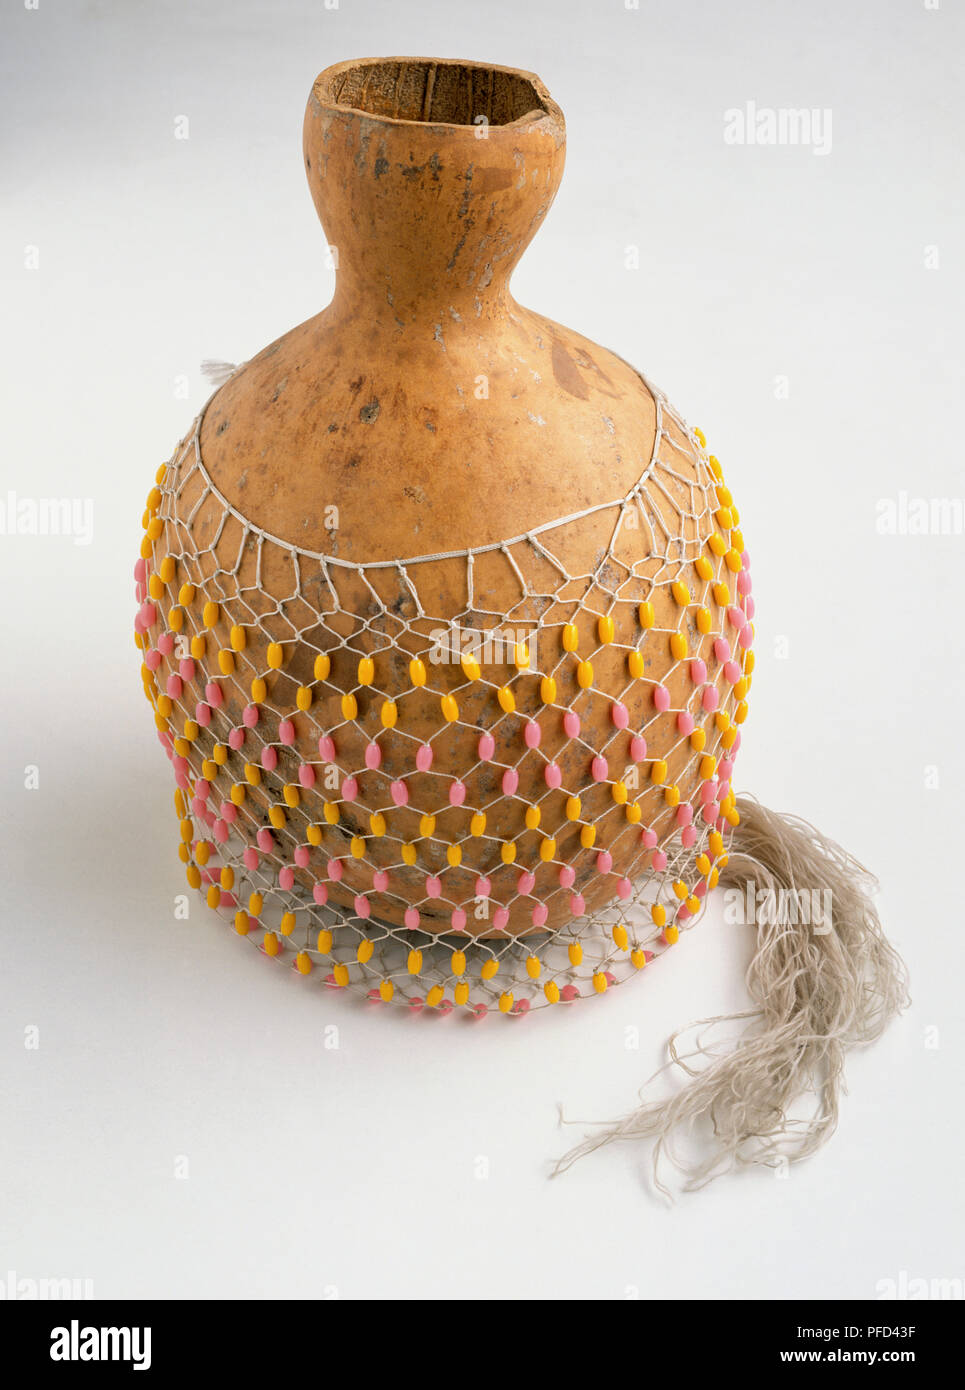 Saraka, African percussion instrument with net covering. Stock Photo